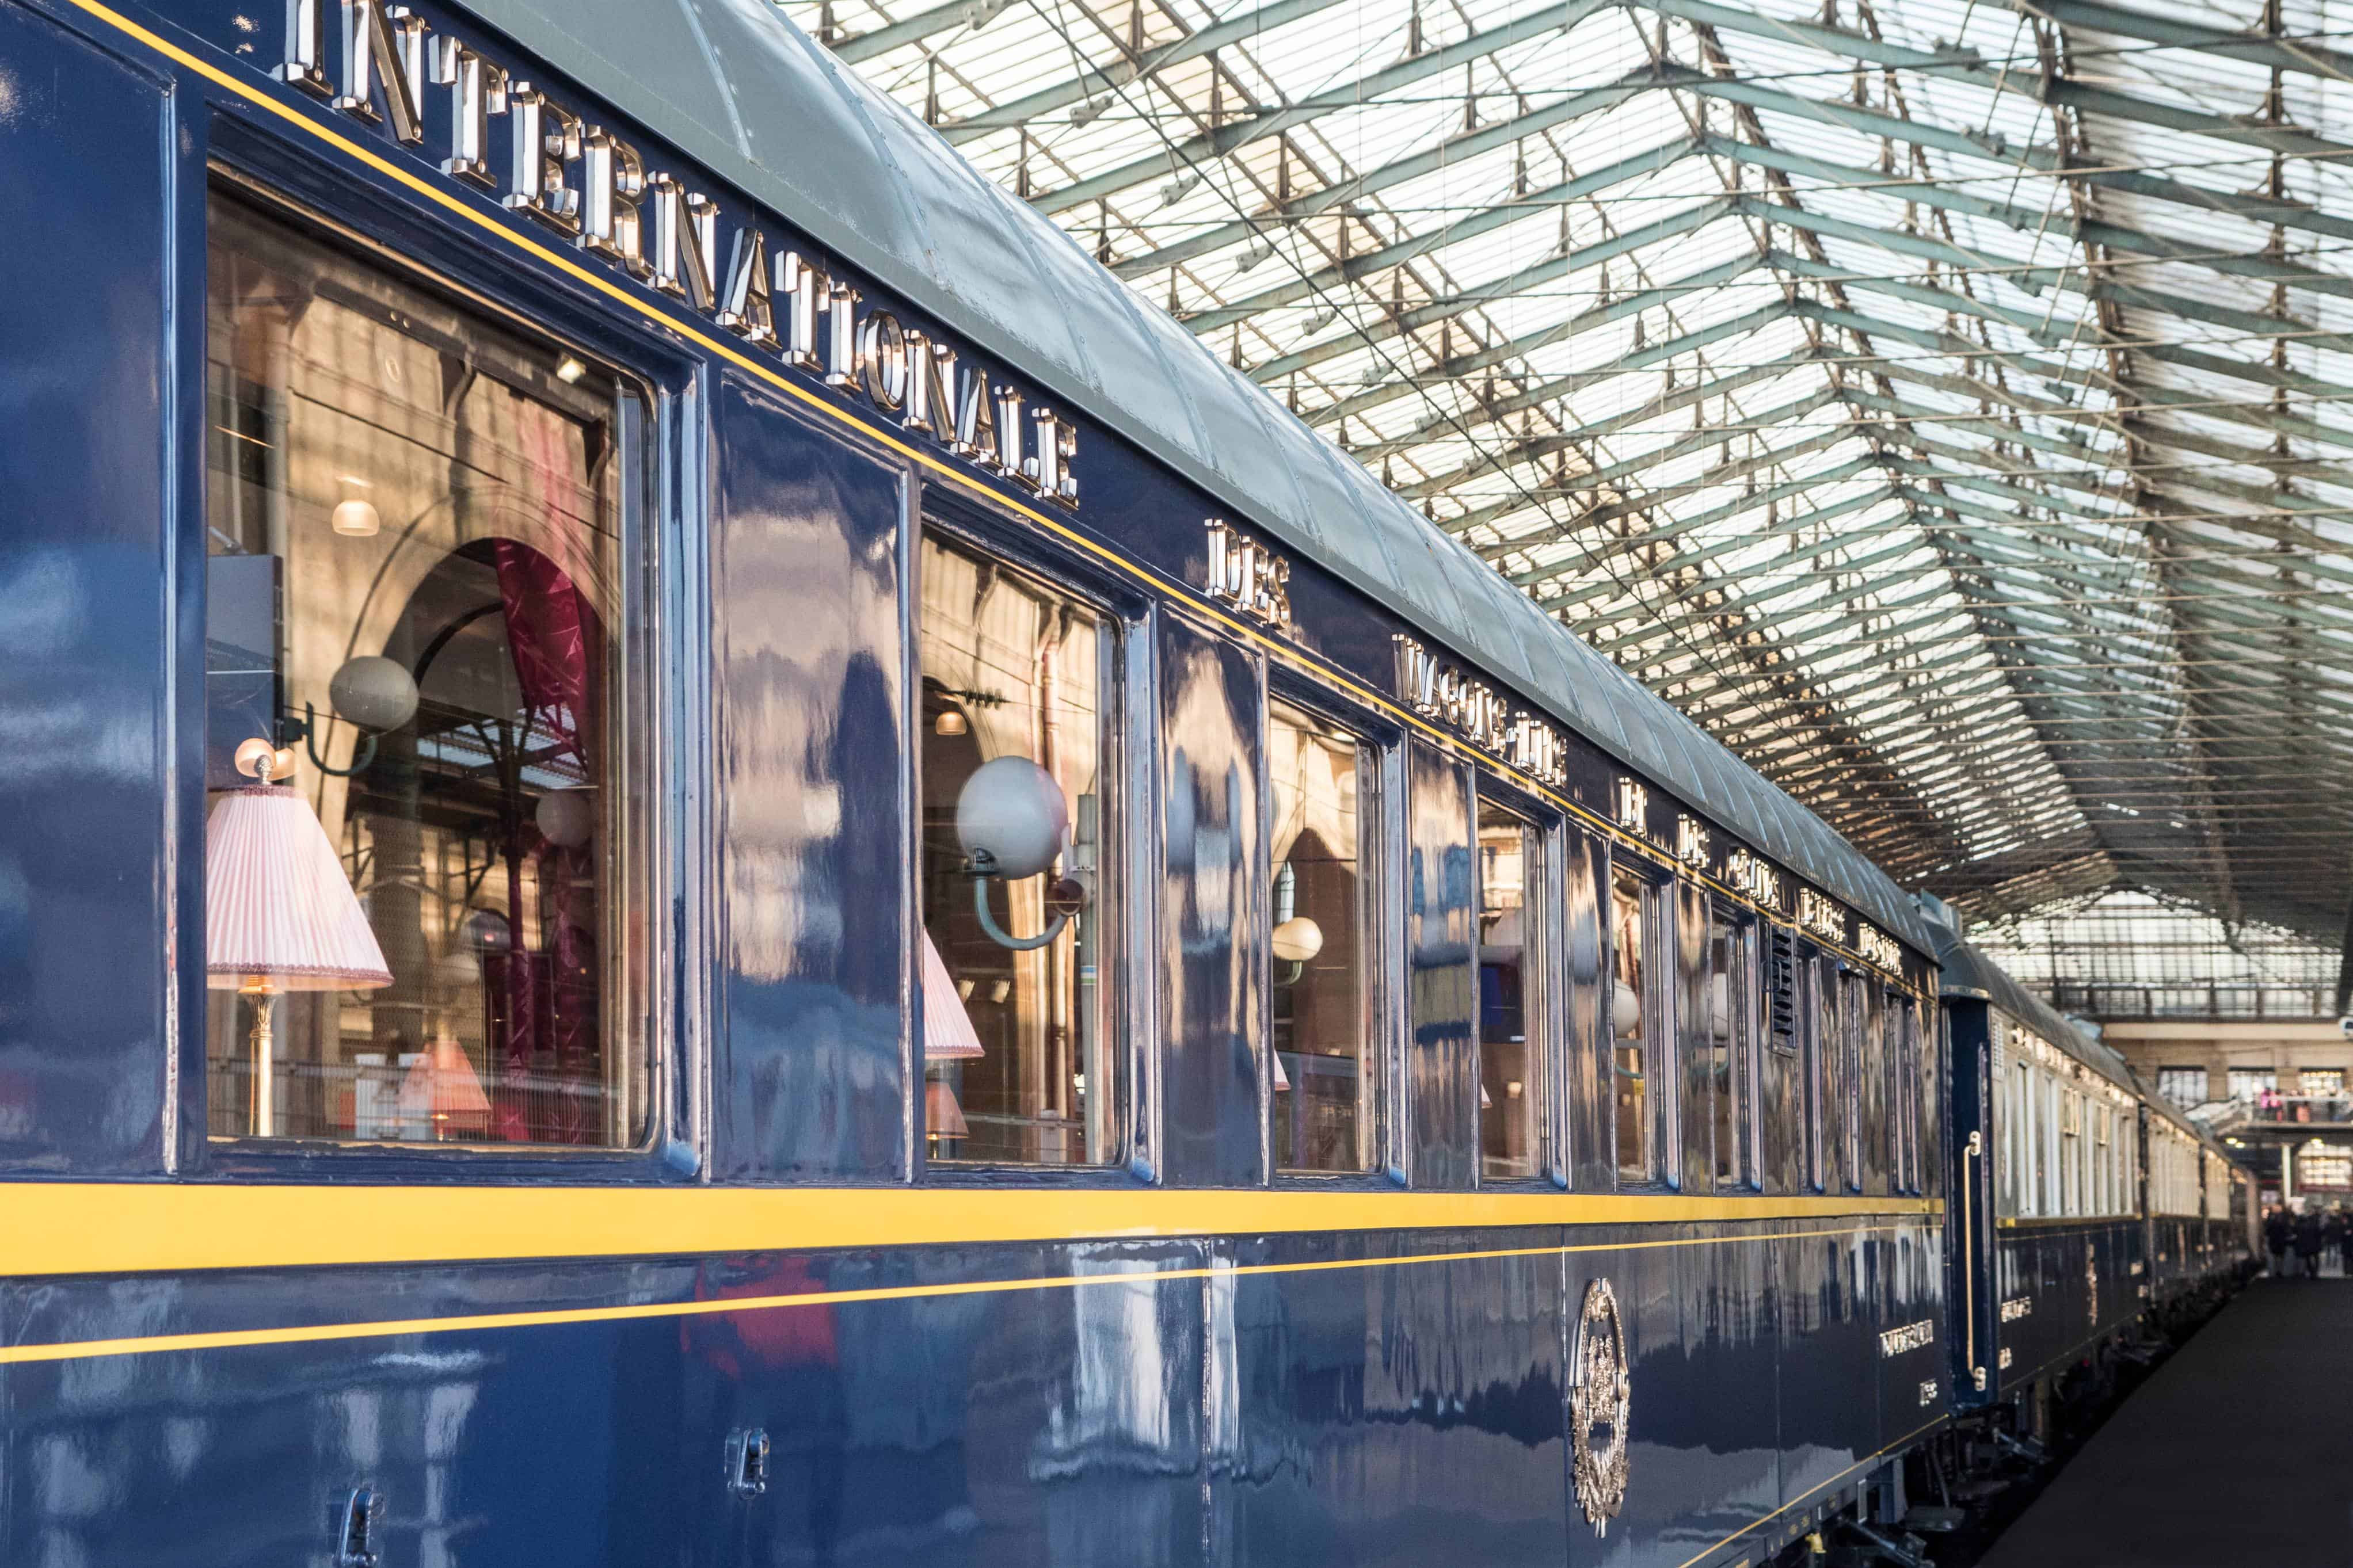 , All aboard the Orient Express